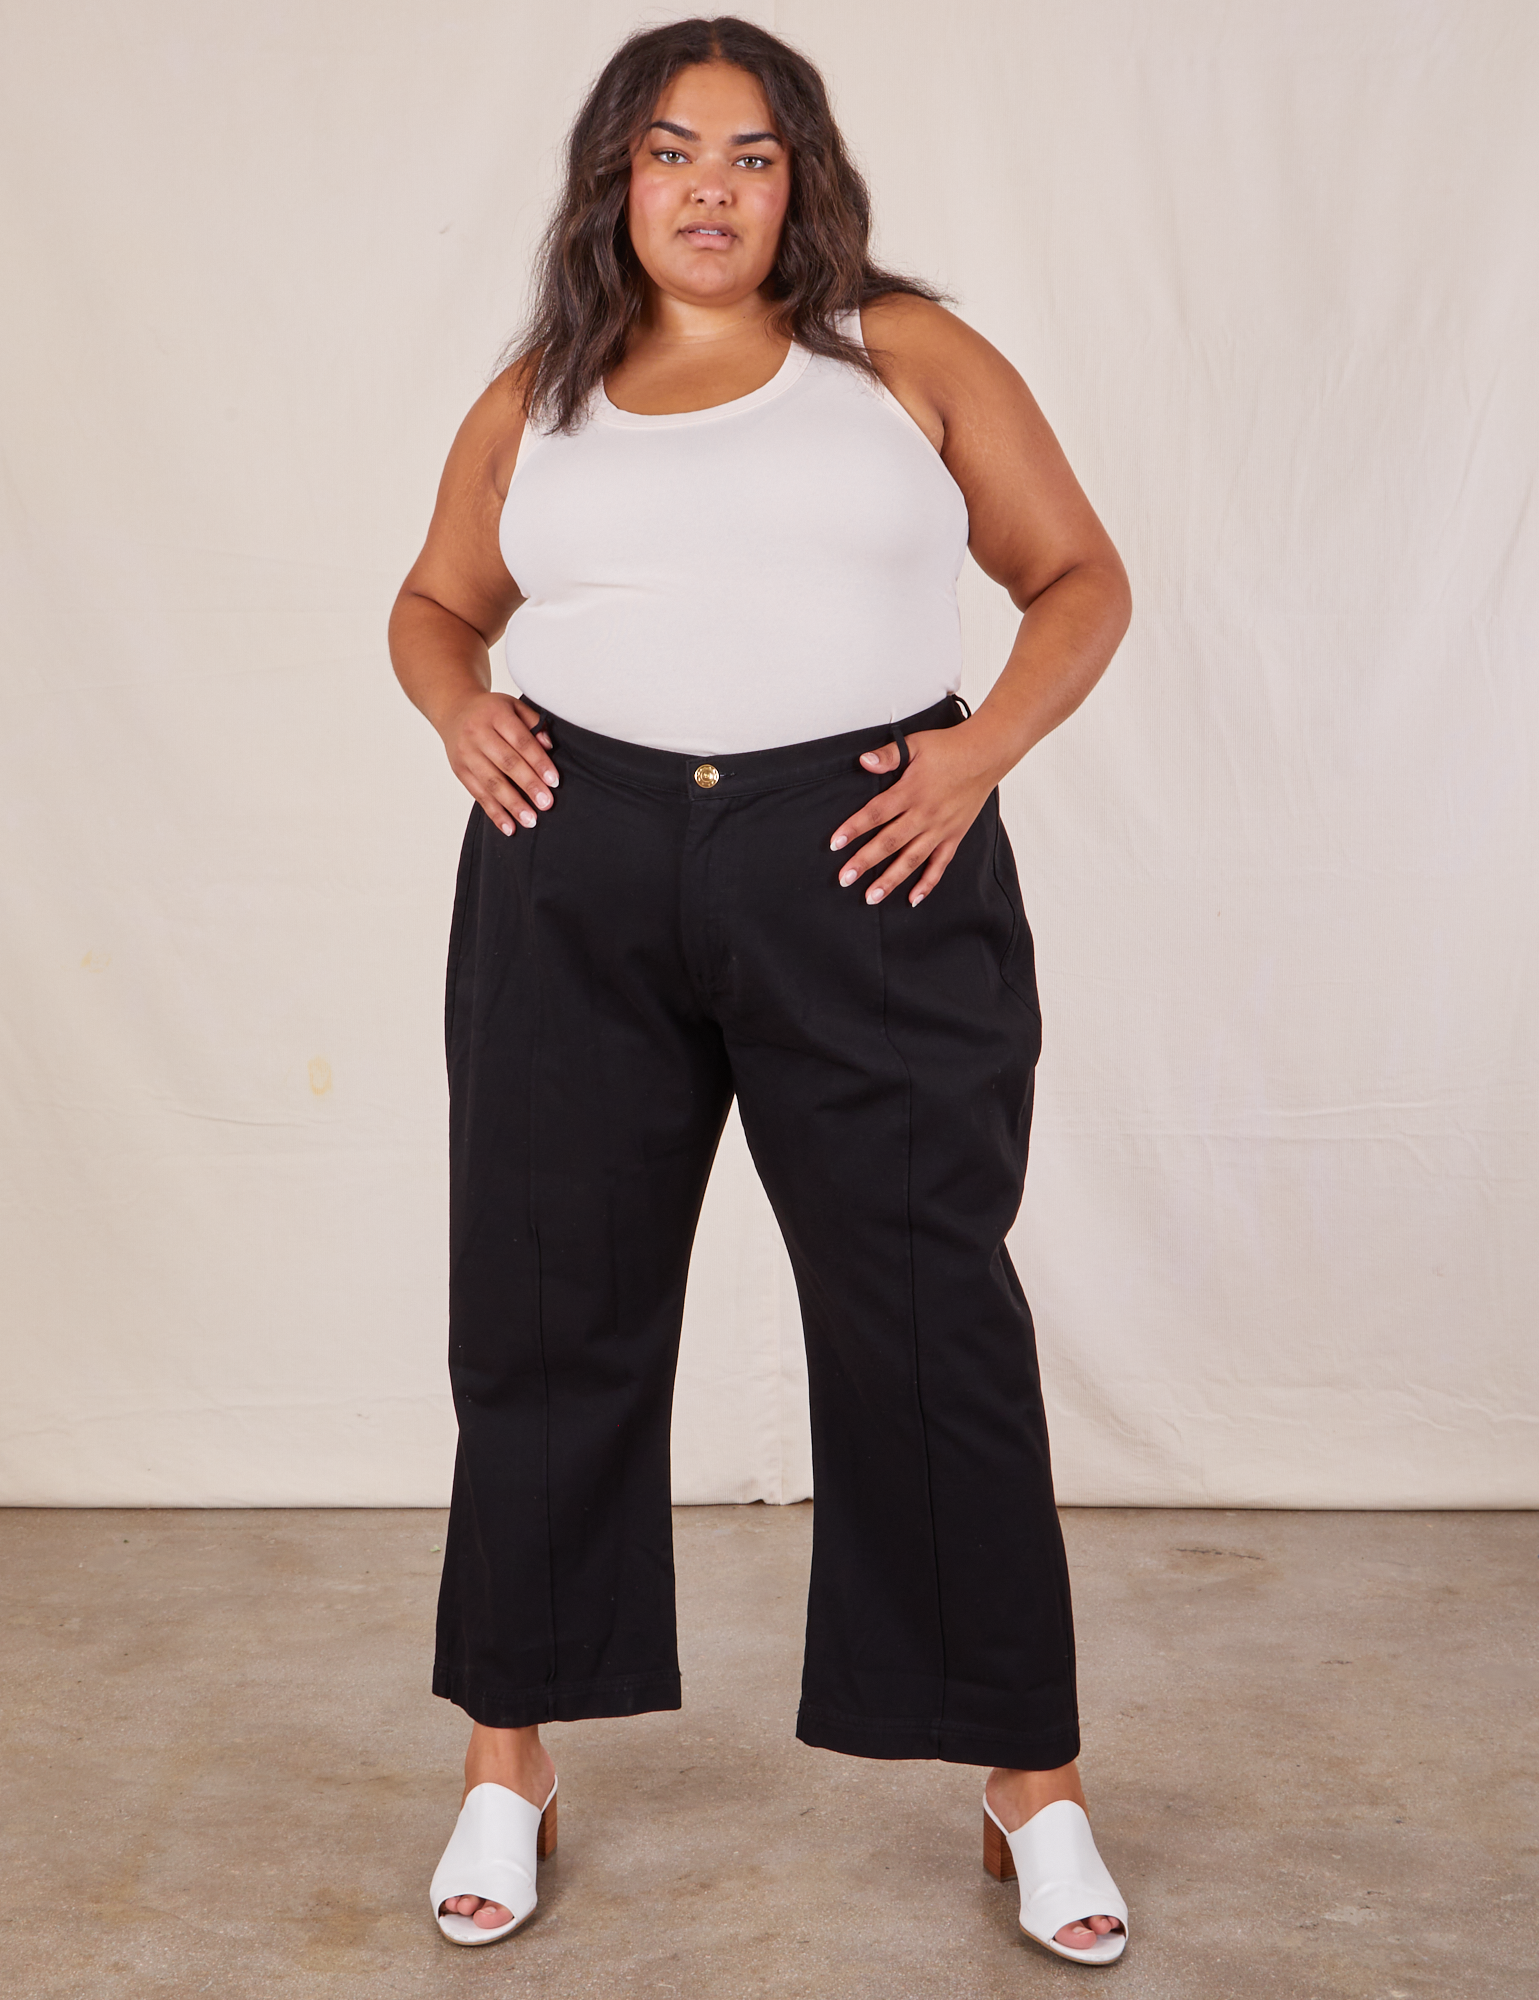 Alicia is 5&#39;9&quot; and wearing 2XL Western Pants in Basic Black paired with a Tank Top in vintage tee off-white